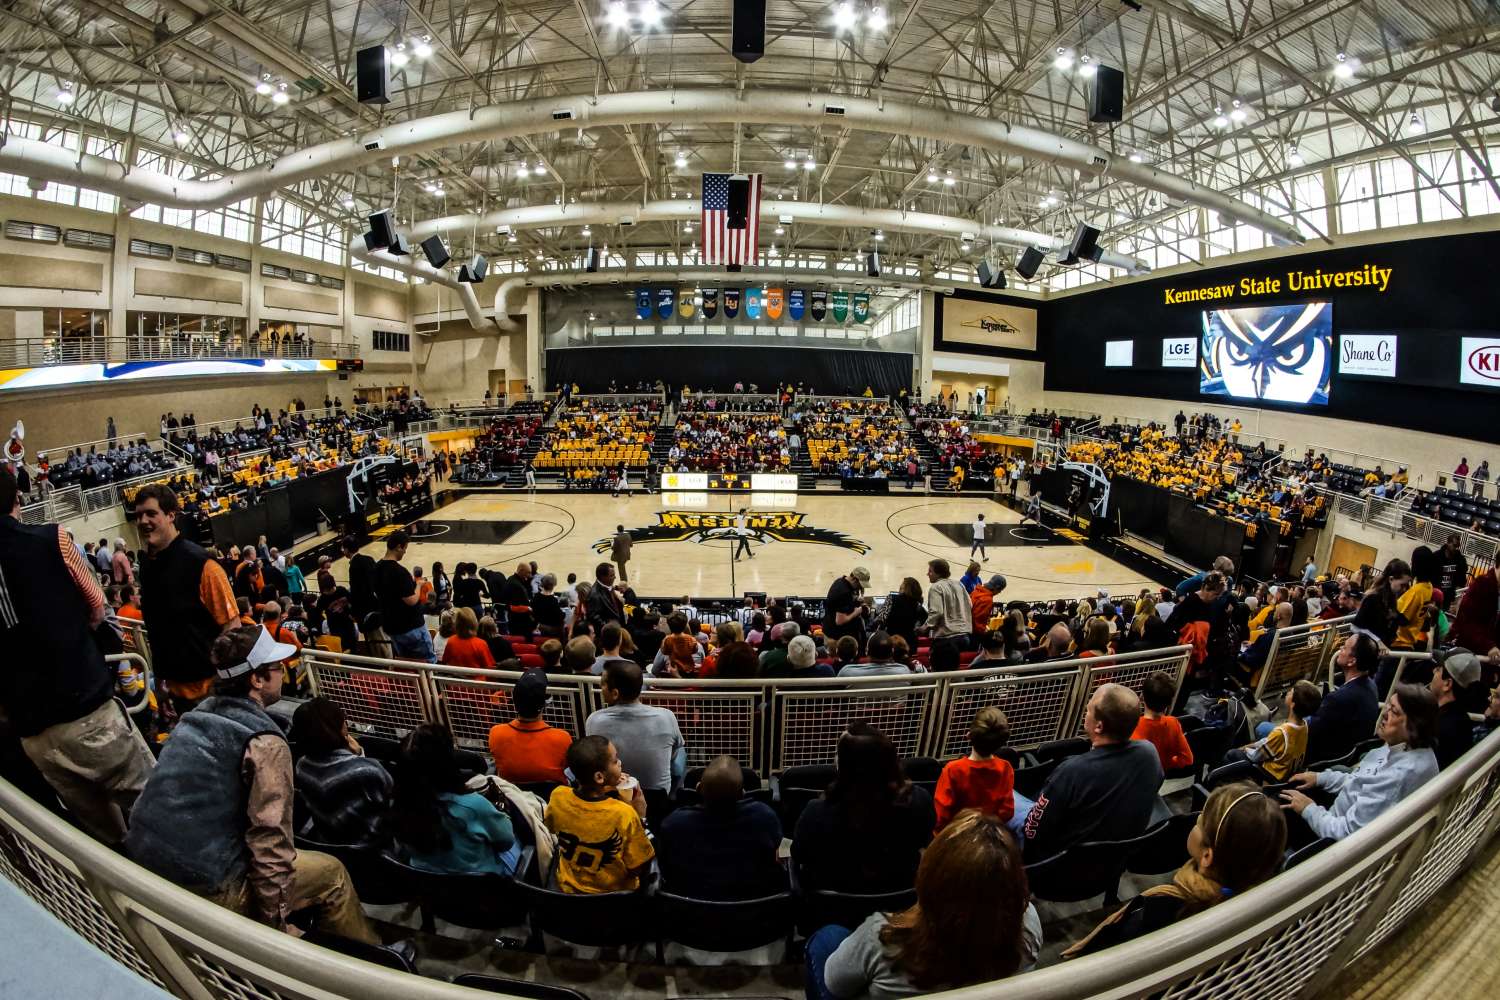 With O’Bannon ruling, Kennesaw State is only watching from the stands